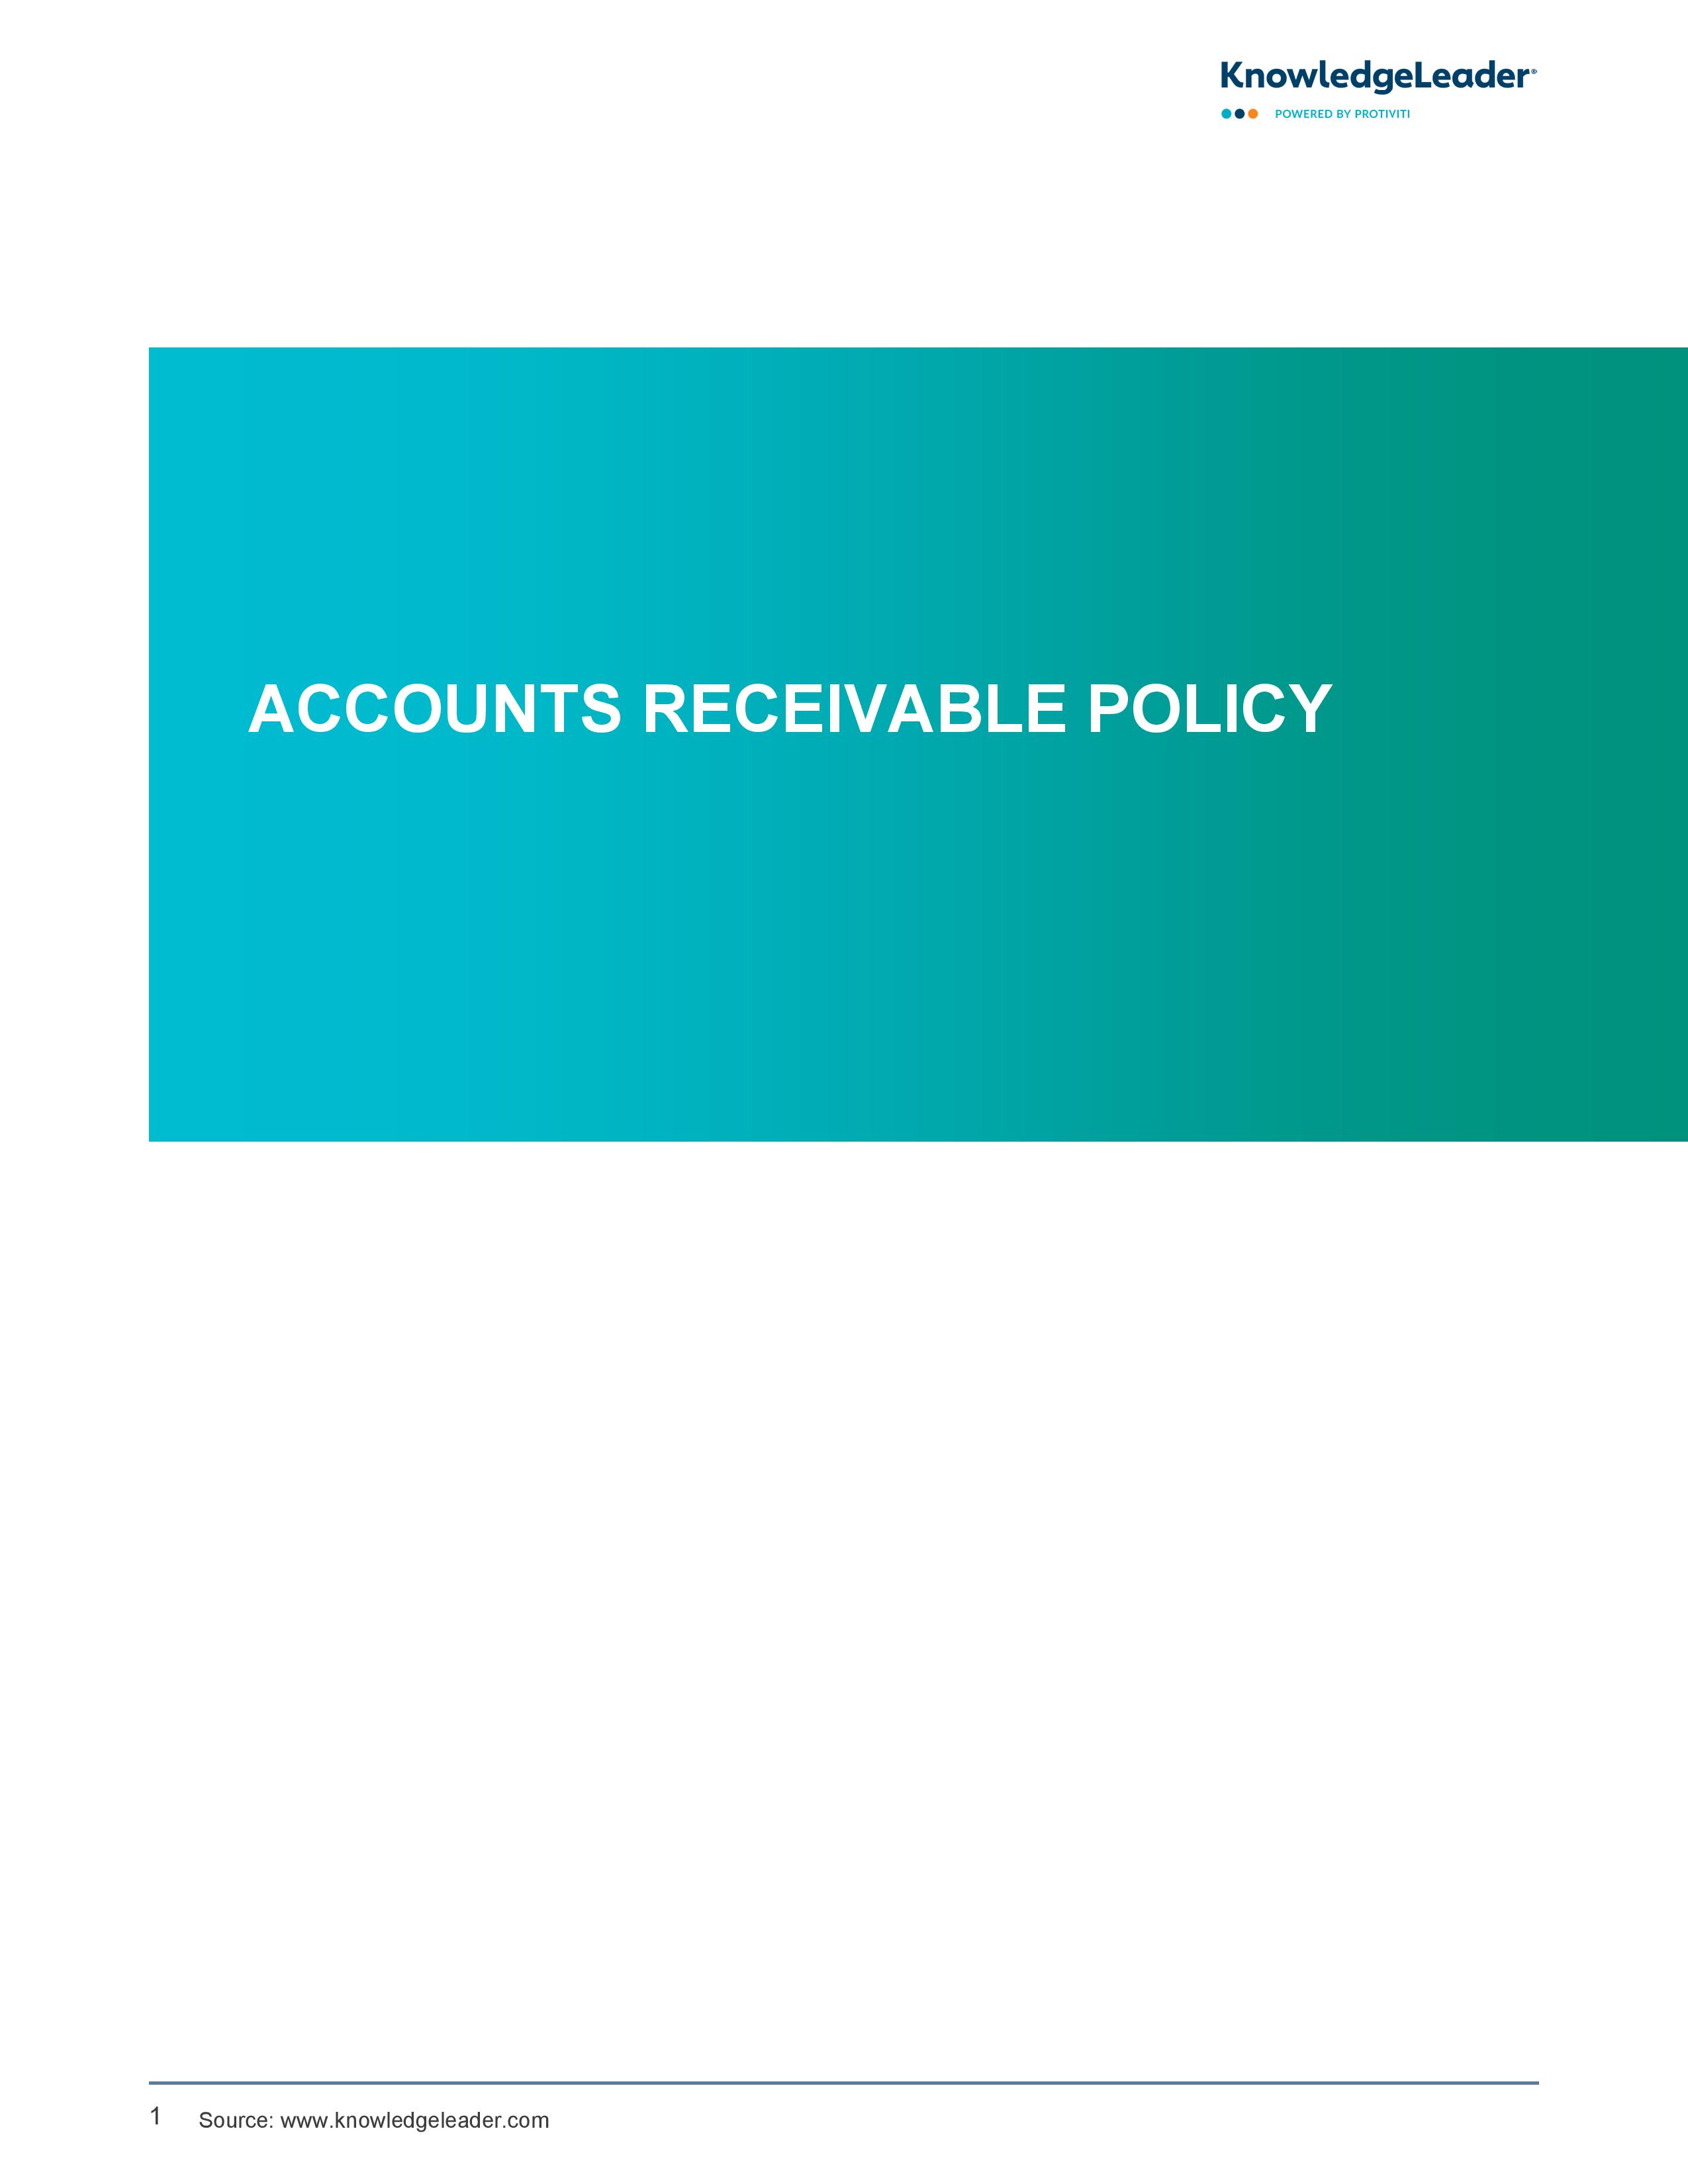 screenshot of the first page of Accounts Receivable Policy